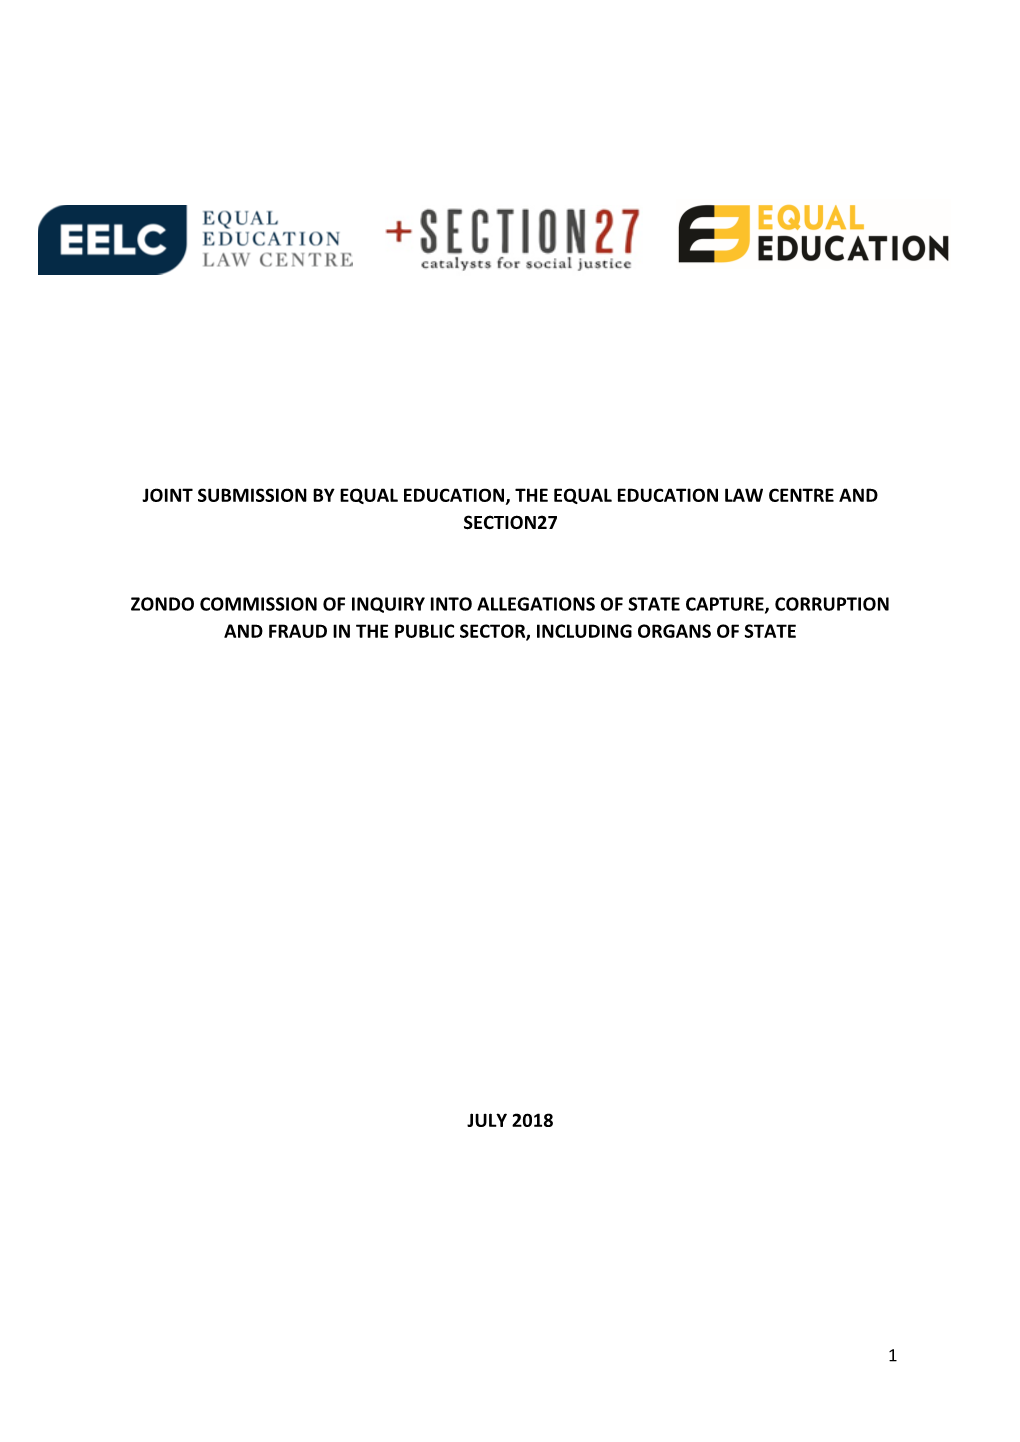 Joint Submission by Equal Education, the Equal Education Law Centre and Section27